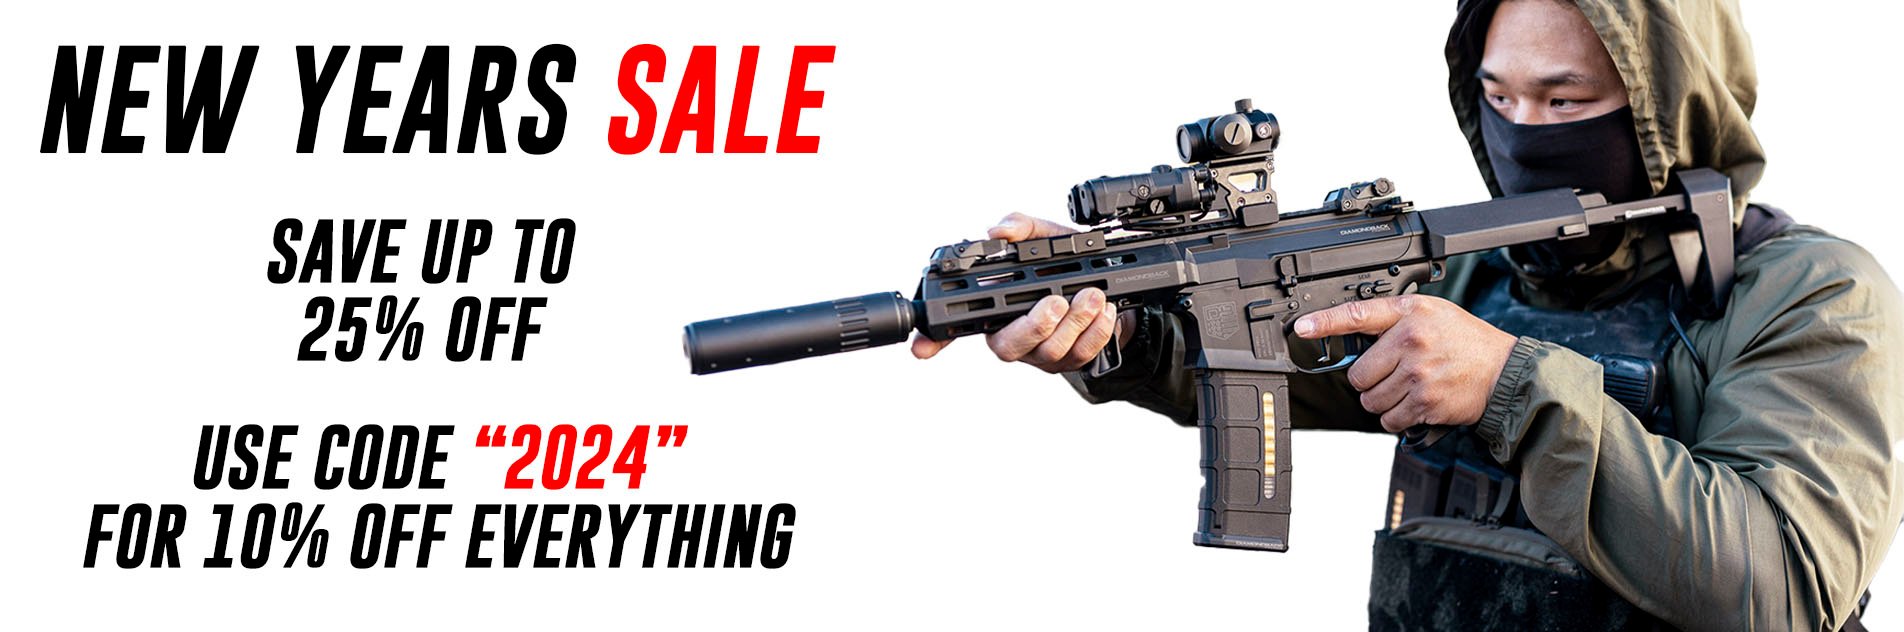 Airsoft GI - Airsoft Guns Store For Airsoft Enthusiasts